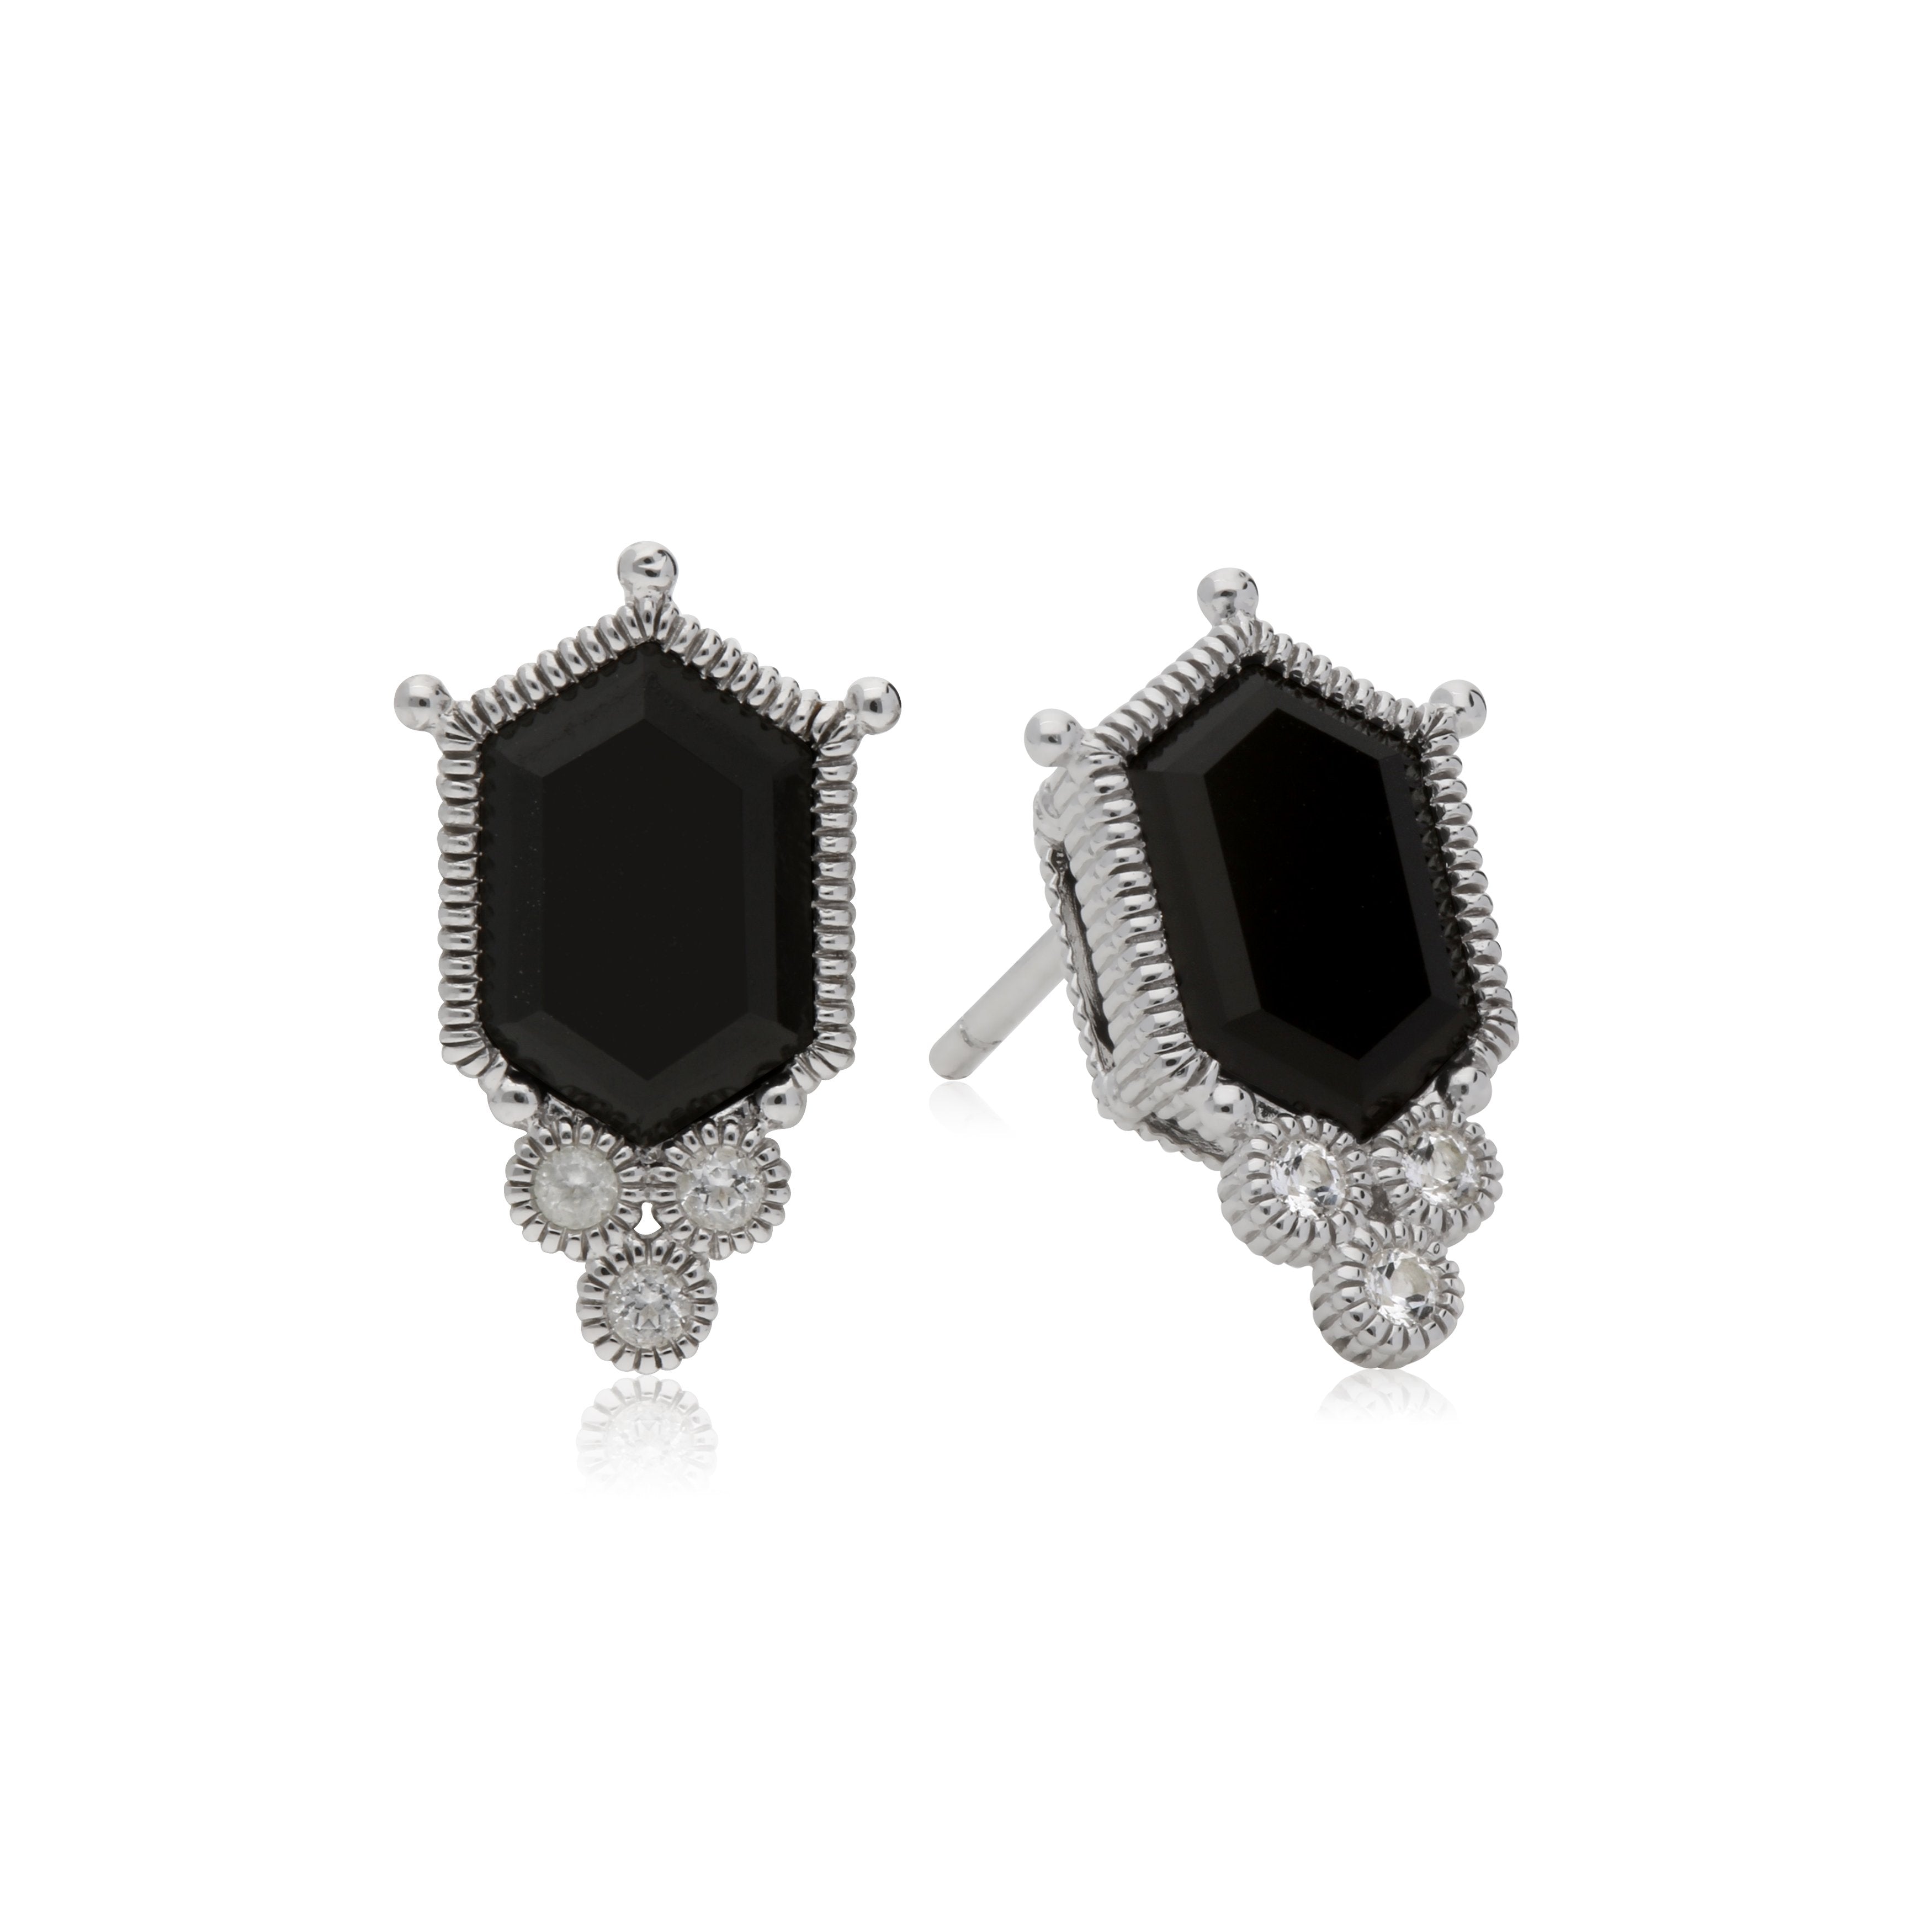 Martinique Black Onyx Hexagon Stud Earrings with White Topaz Accents